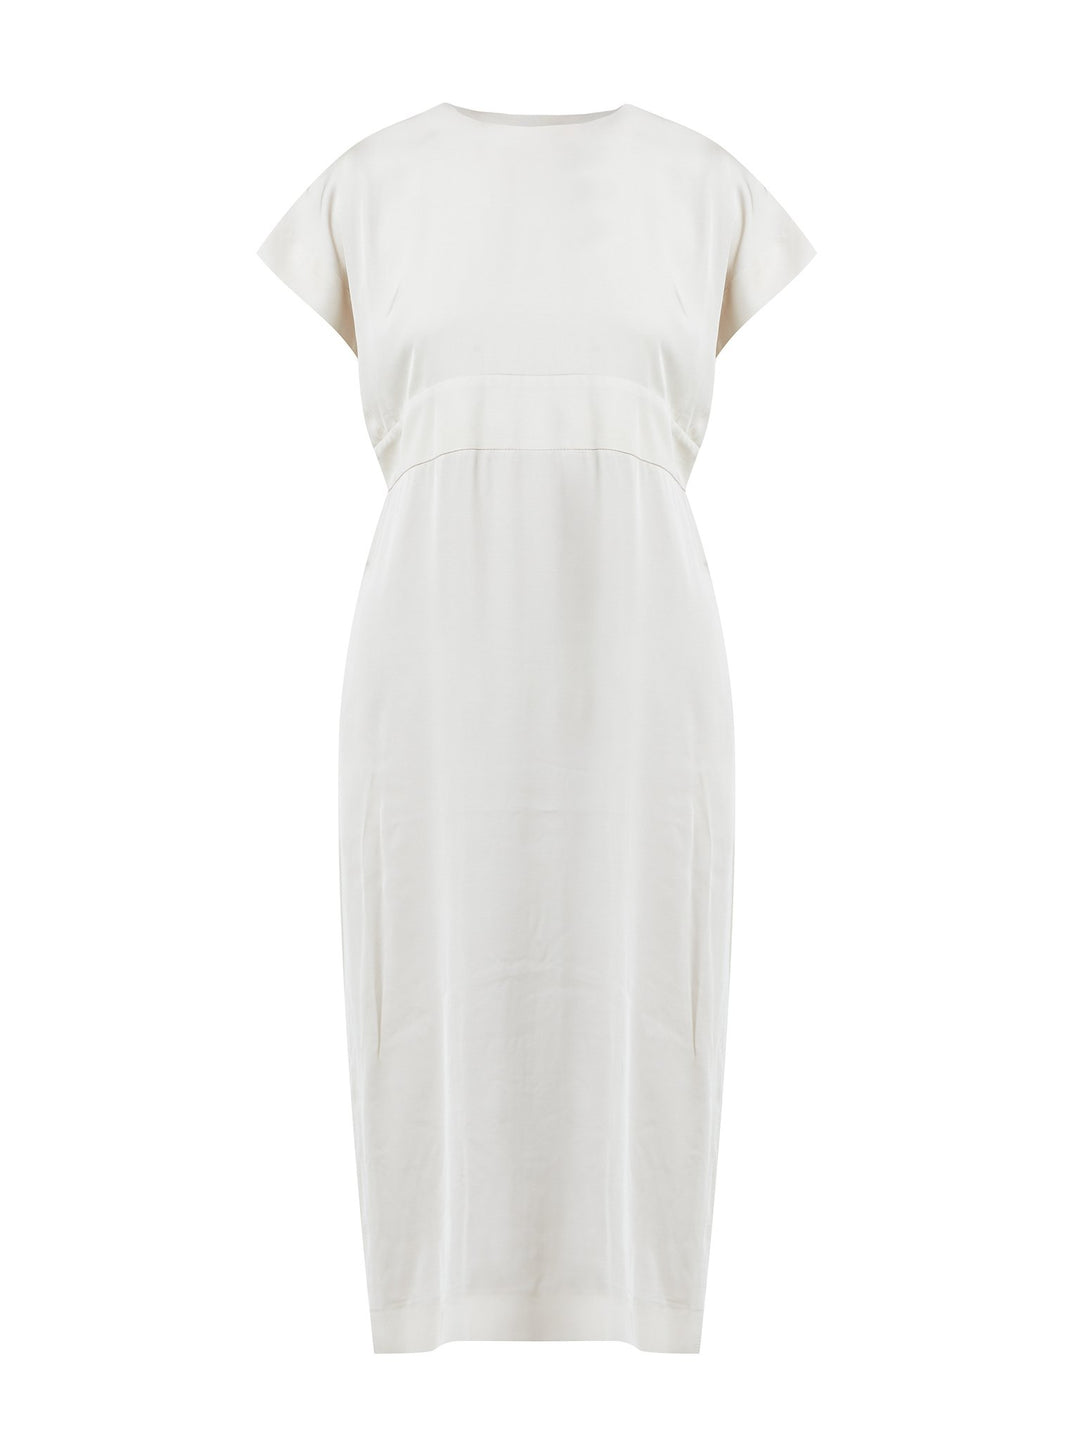 Helen McAlinden Shiv Ivory Dress in a Woven Satin. Classic Occasionwear, modernised.  The Perfect Wedding Guest Dress.